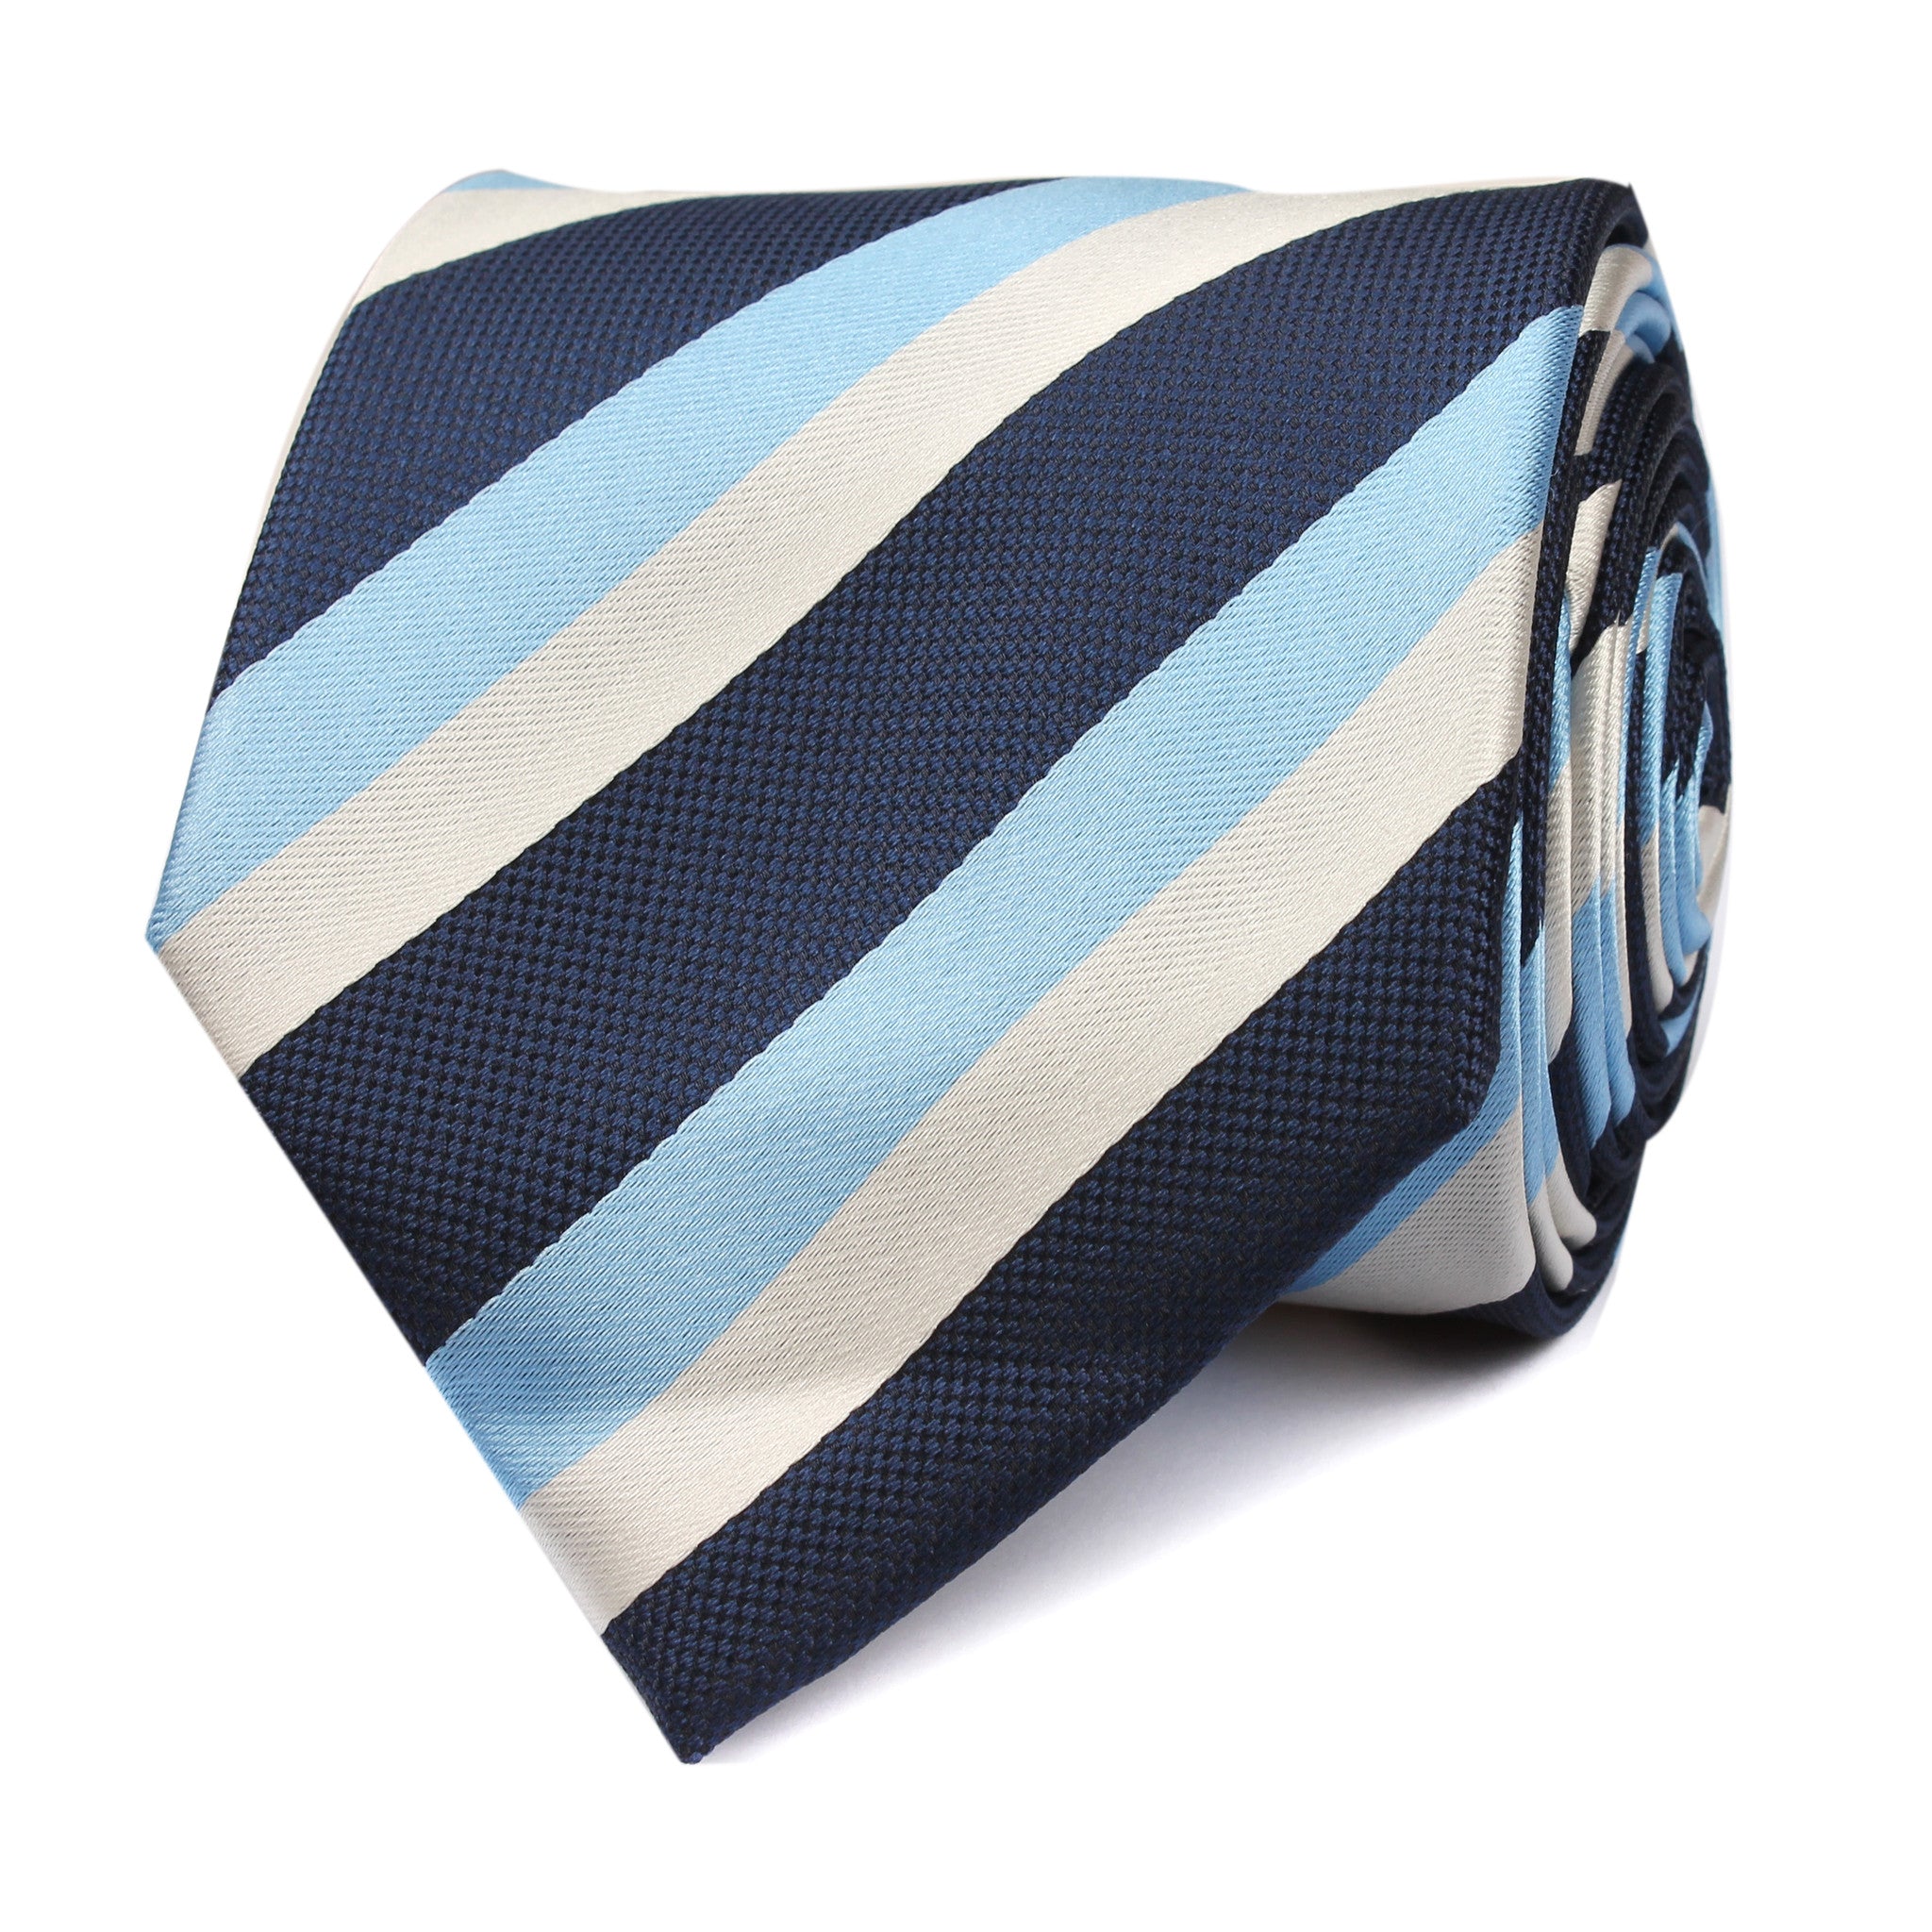 White Navy and Light Blue Striped Tie Front View